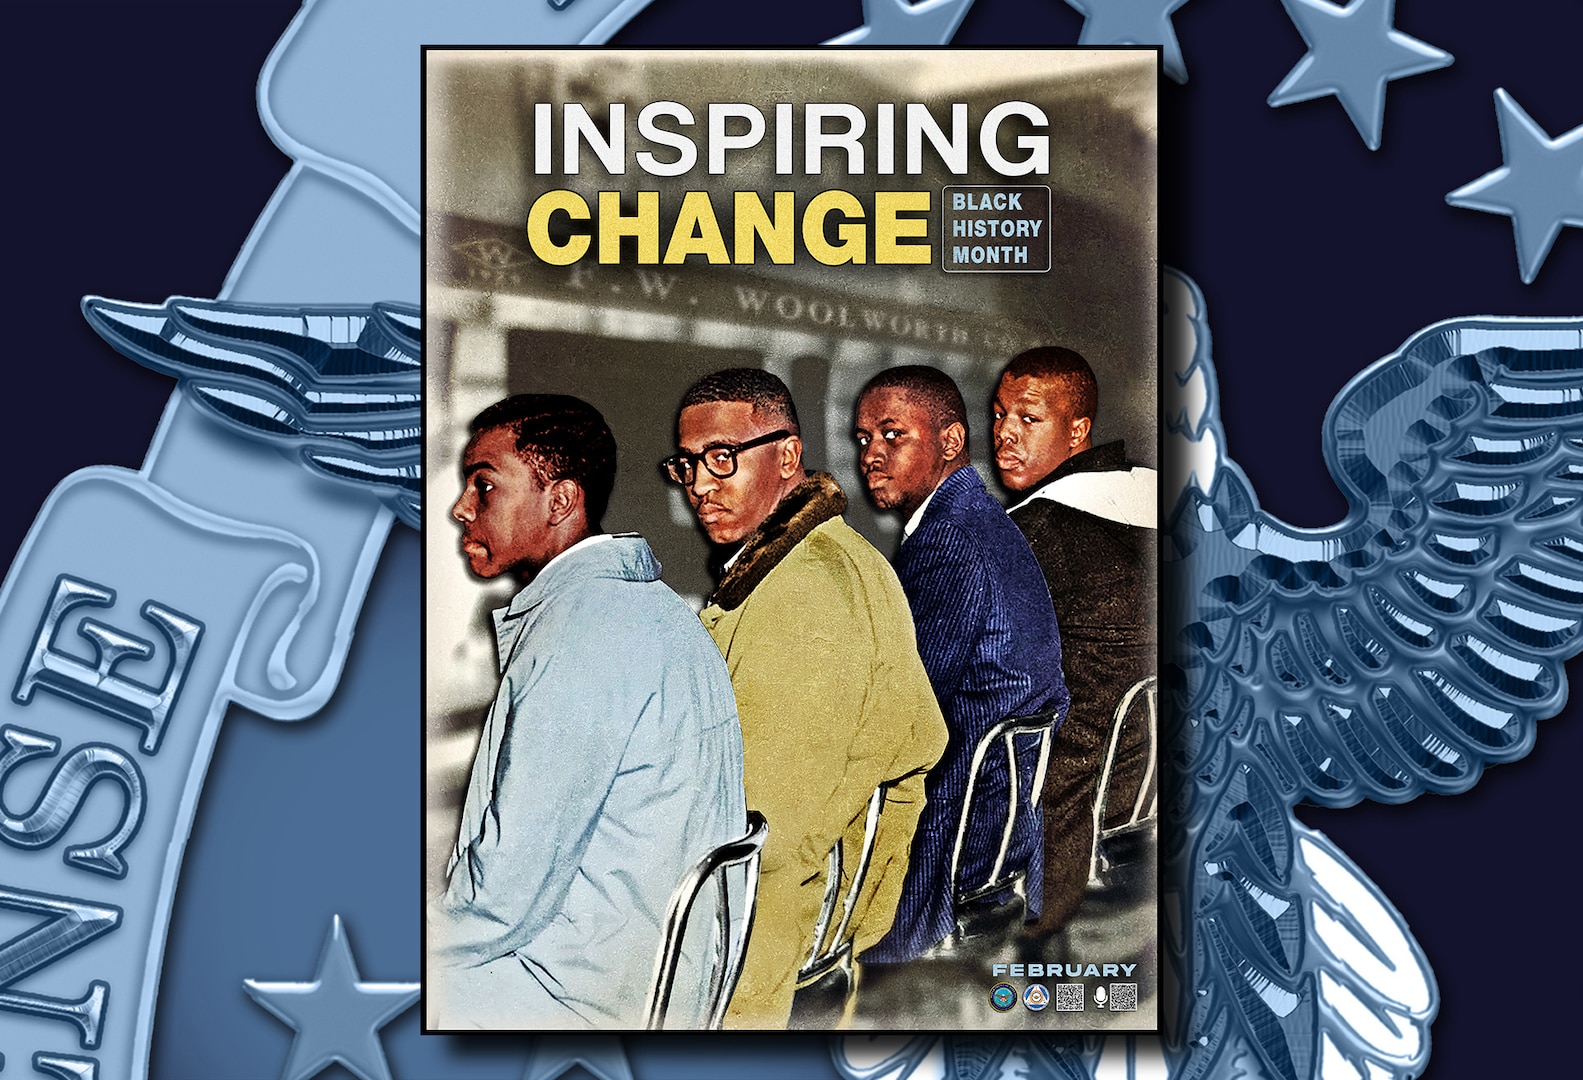 Four young Black men are seated at a counter. Text that says "Inspiring Change" floats above them. The men are dressed in similarly designed light jackets of varying colors of light blue, gold, blue and brown.